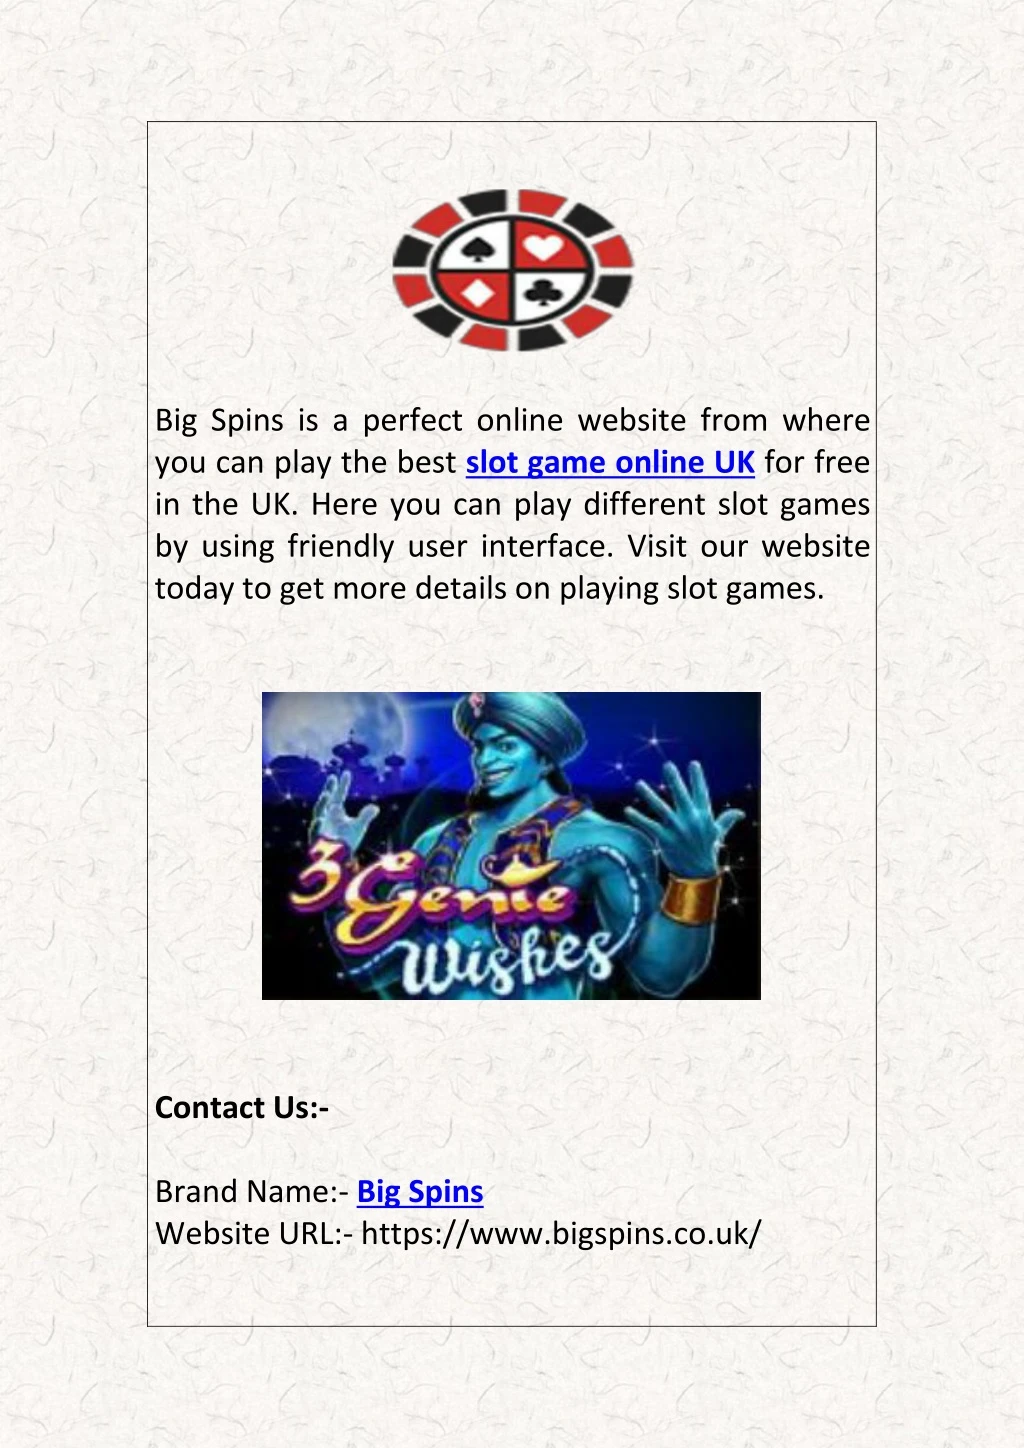 big spins is a perfect online website from where